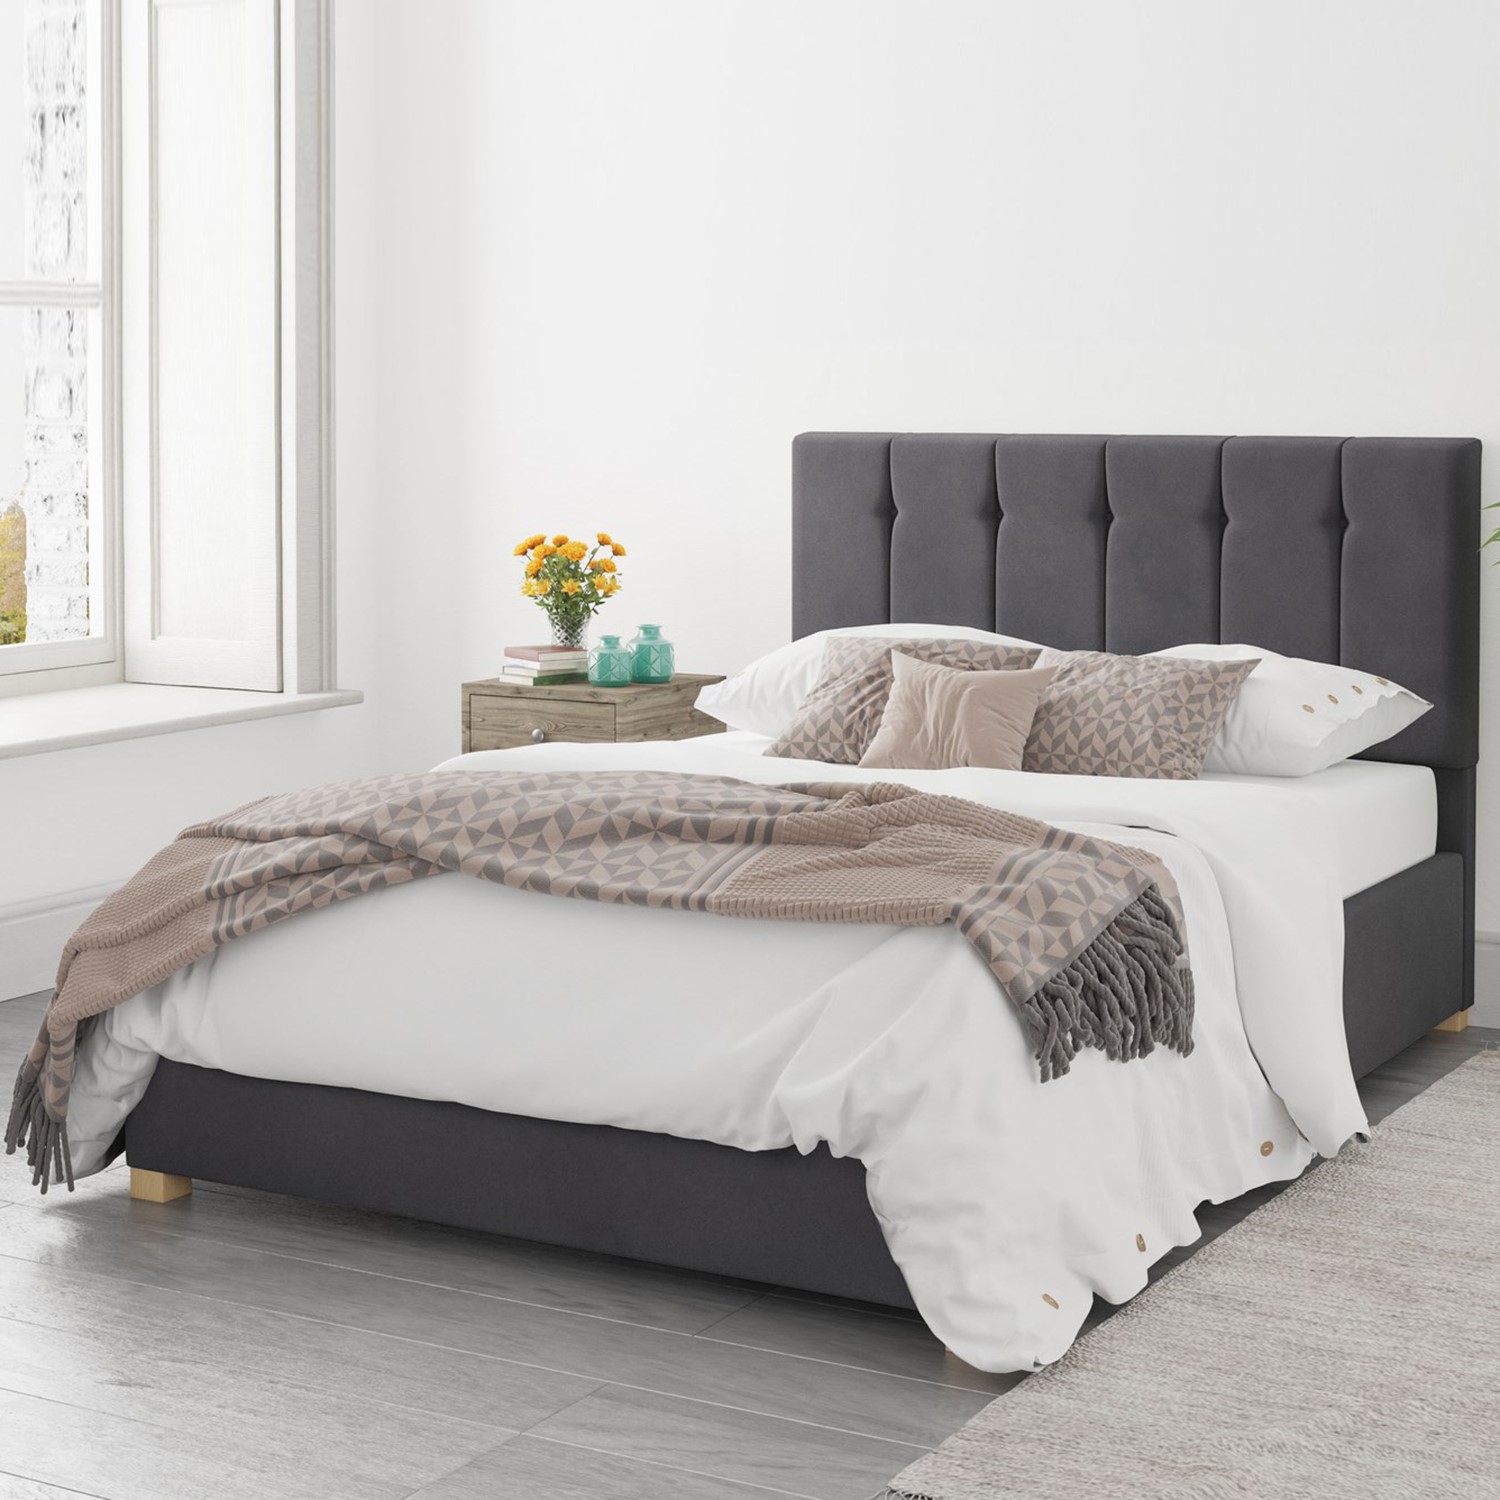 Read more about Grey velvet king size ottoman bed pimilico aspire